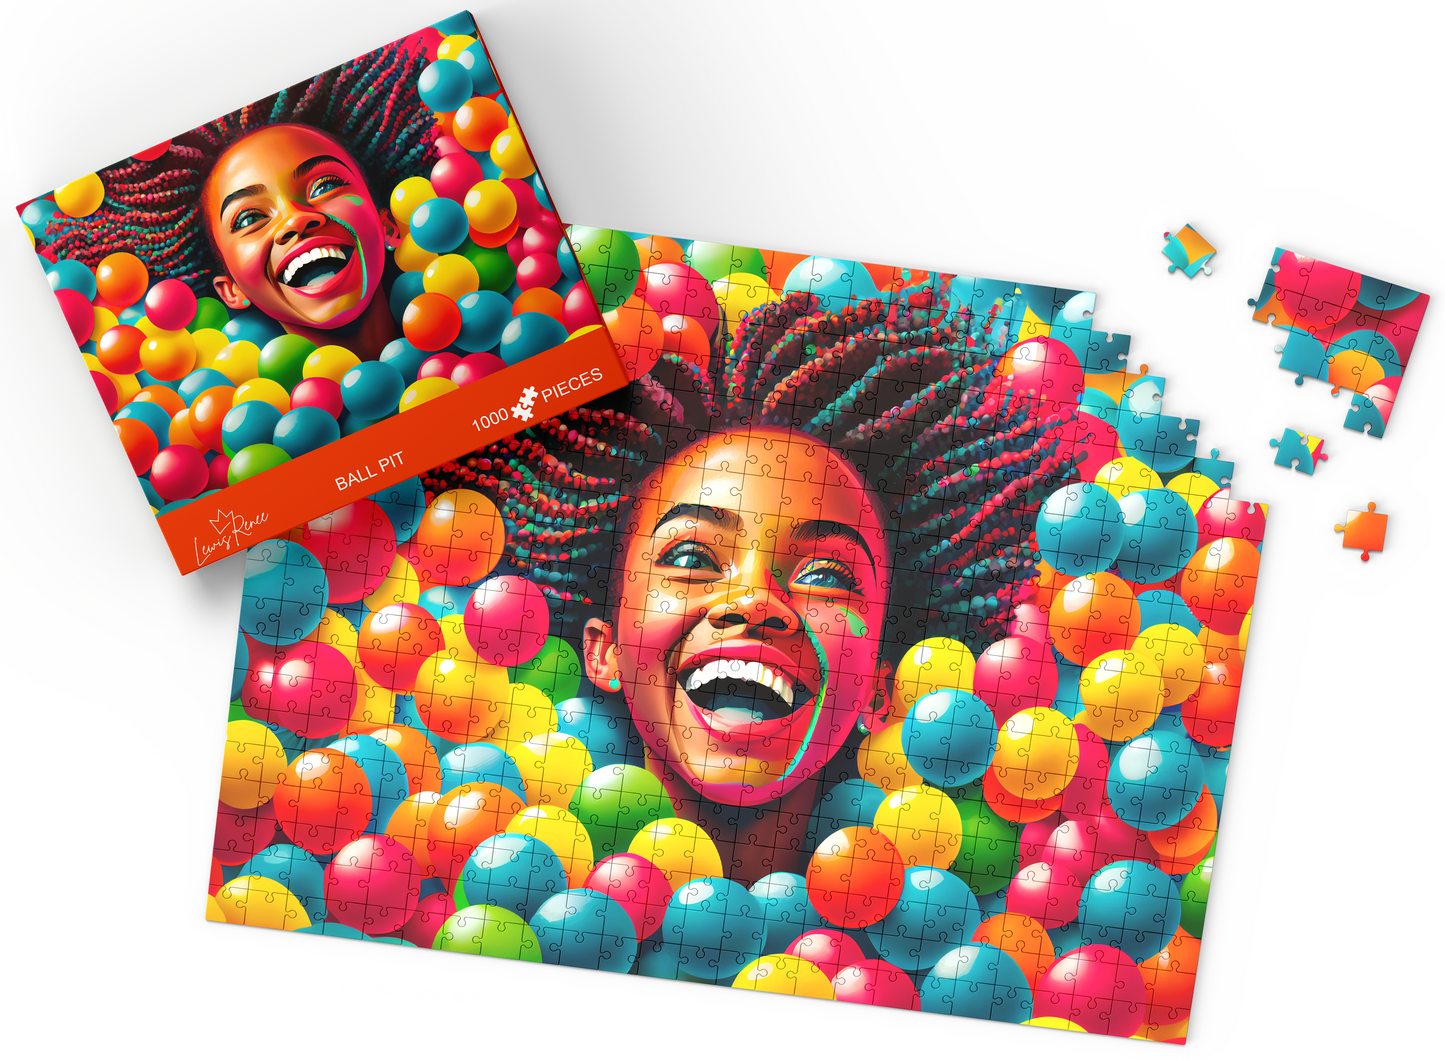 Immerse in African American Puzzle Culture: Engaging 1000-Piece Brain Teaser by LewisRenee (Ball Pit)